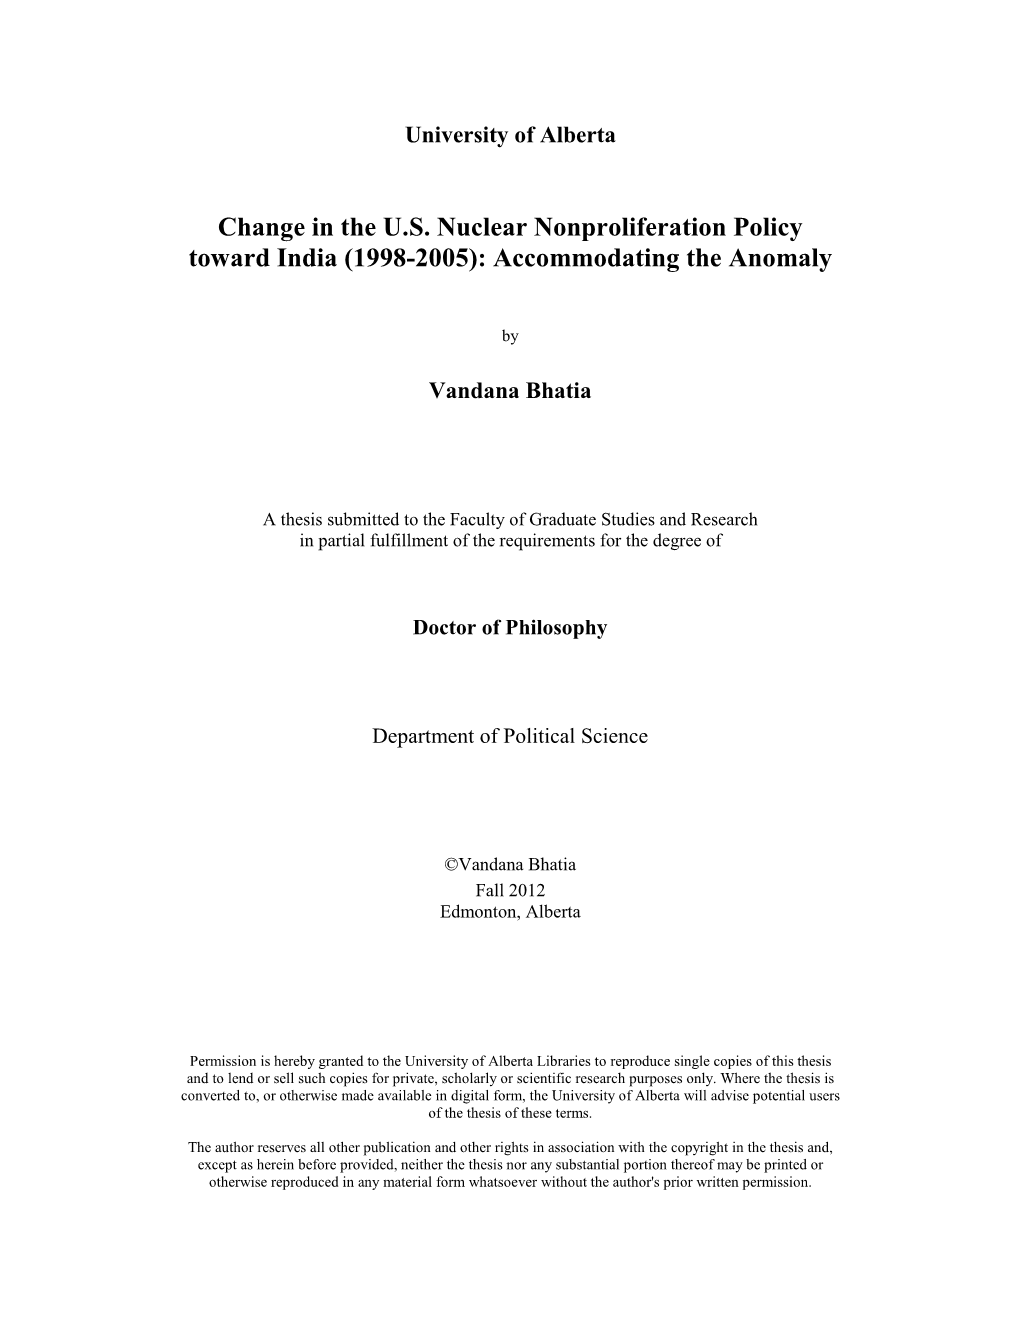 Change in the U.S. Nuclear Nonproliferation Policy Toward India (1998-2005): Accommodating the Anomaly